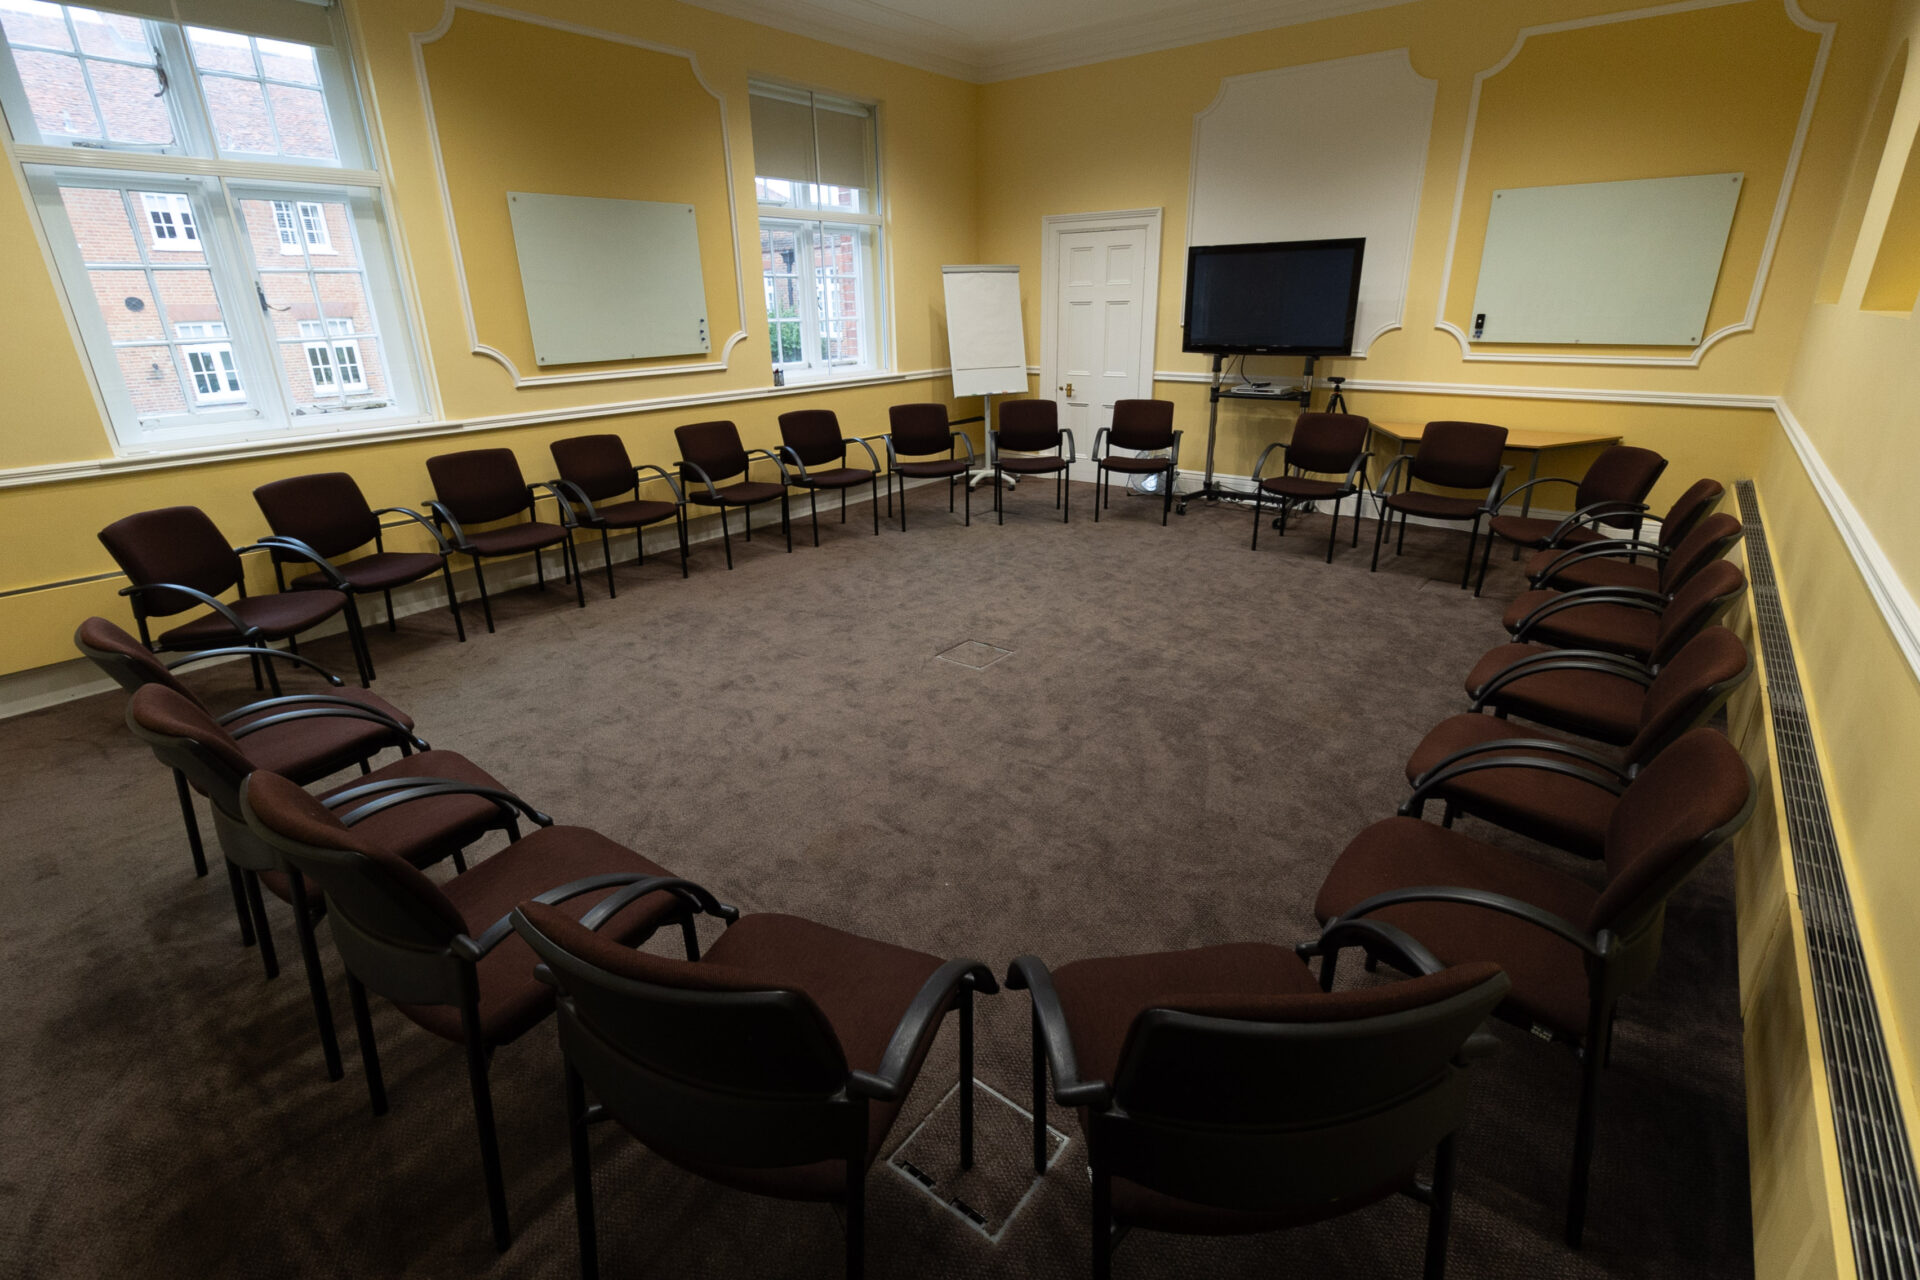 The Hodgson conference room, laid out as a circle to accommodate up to 22 people.